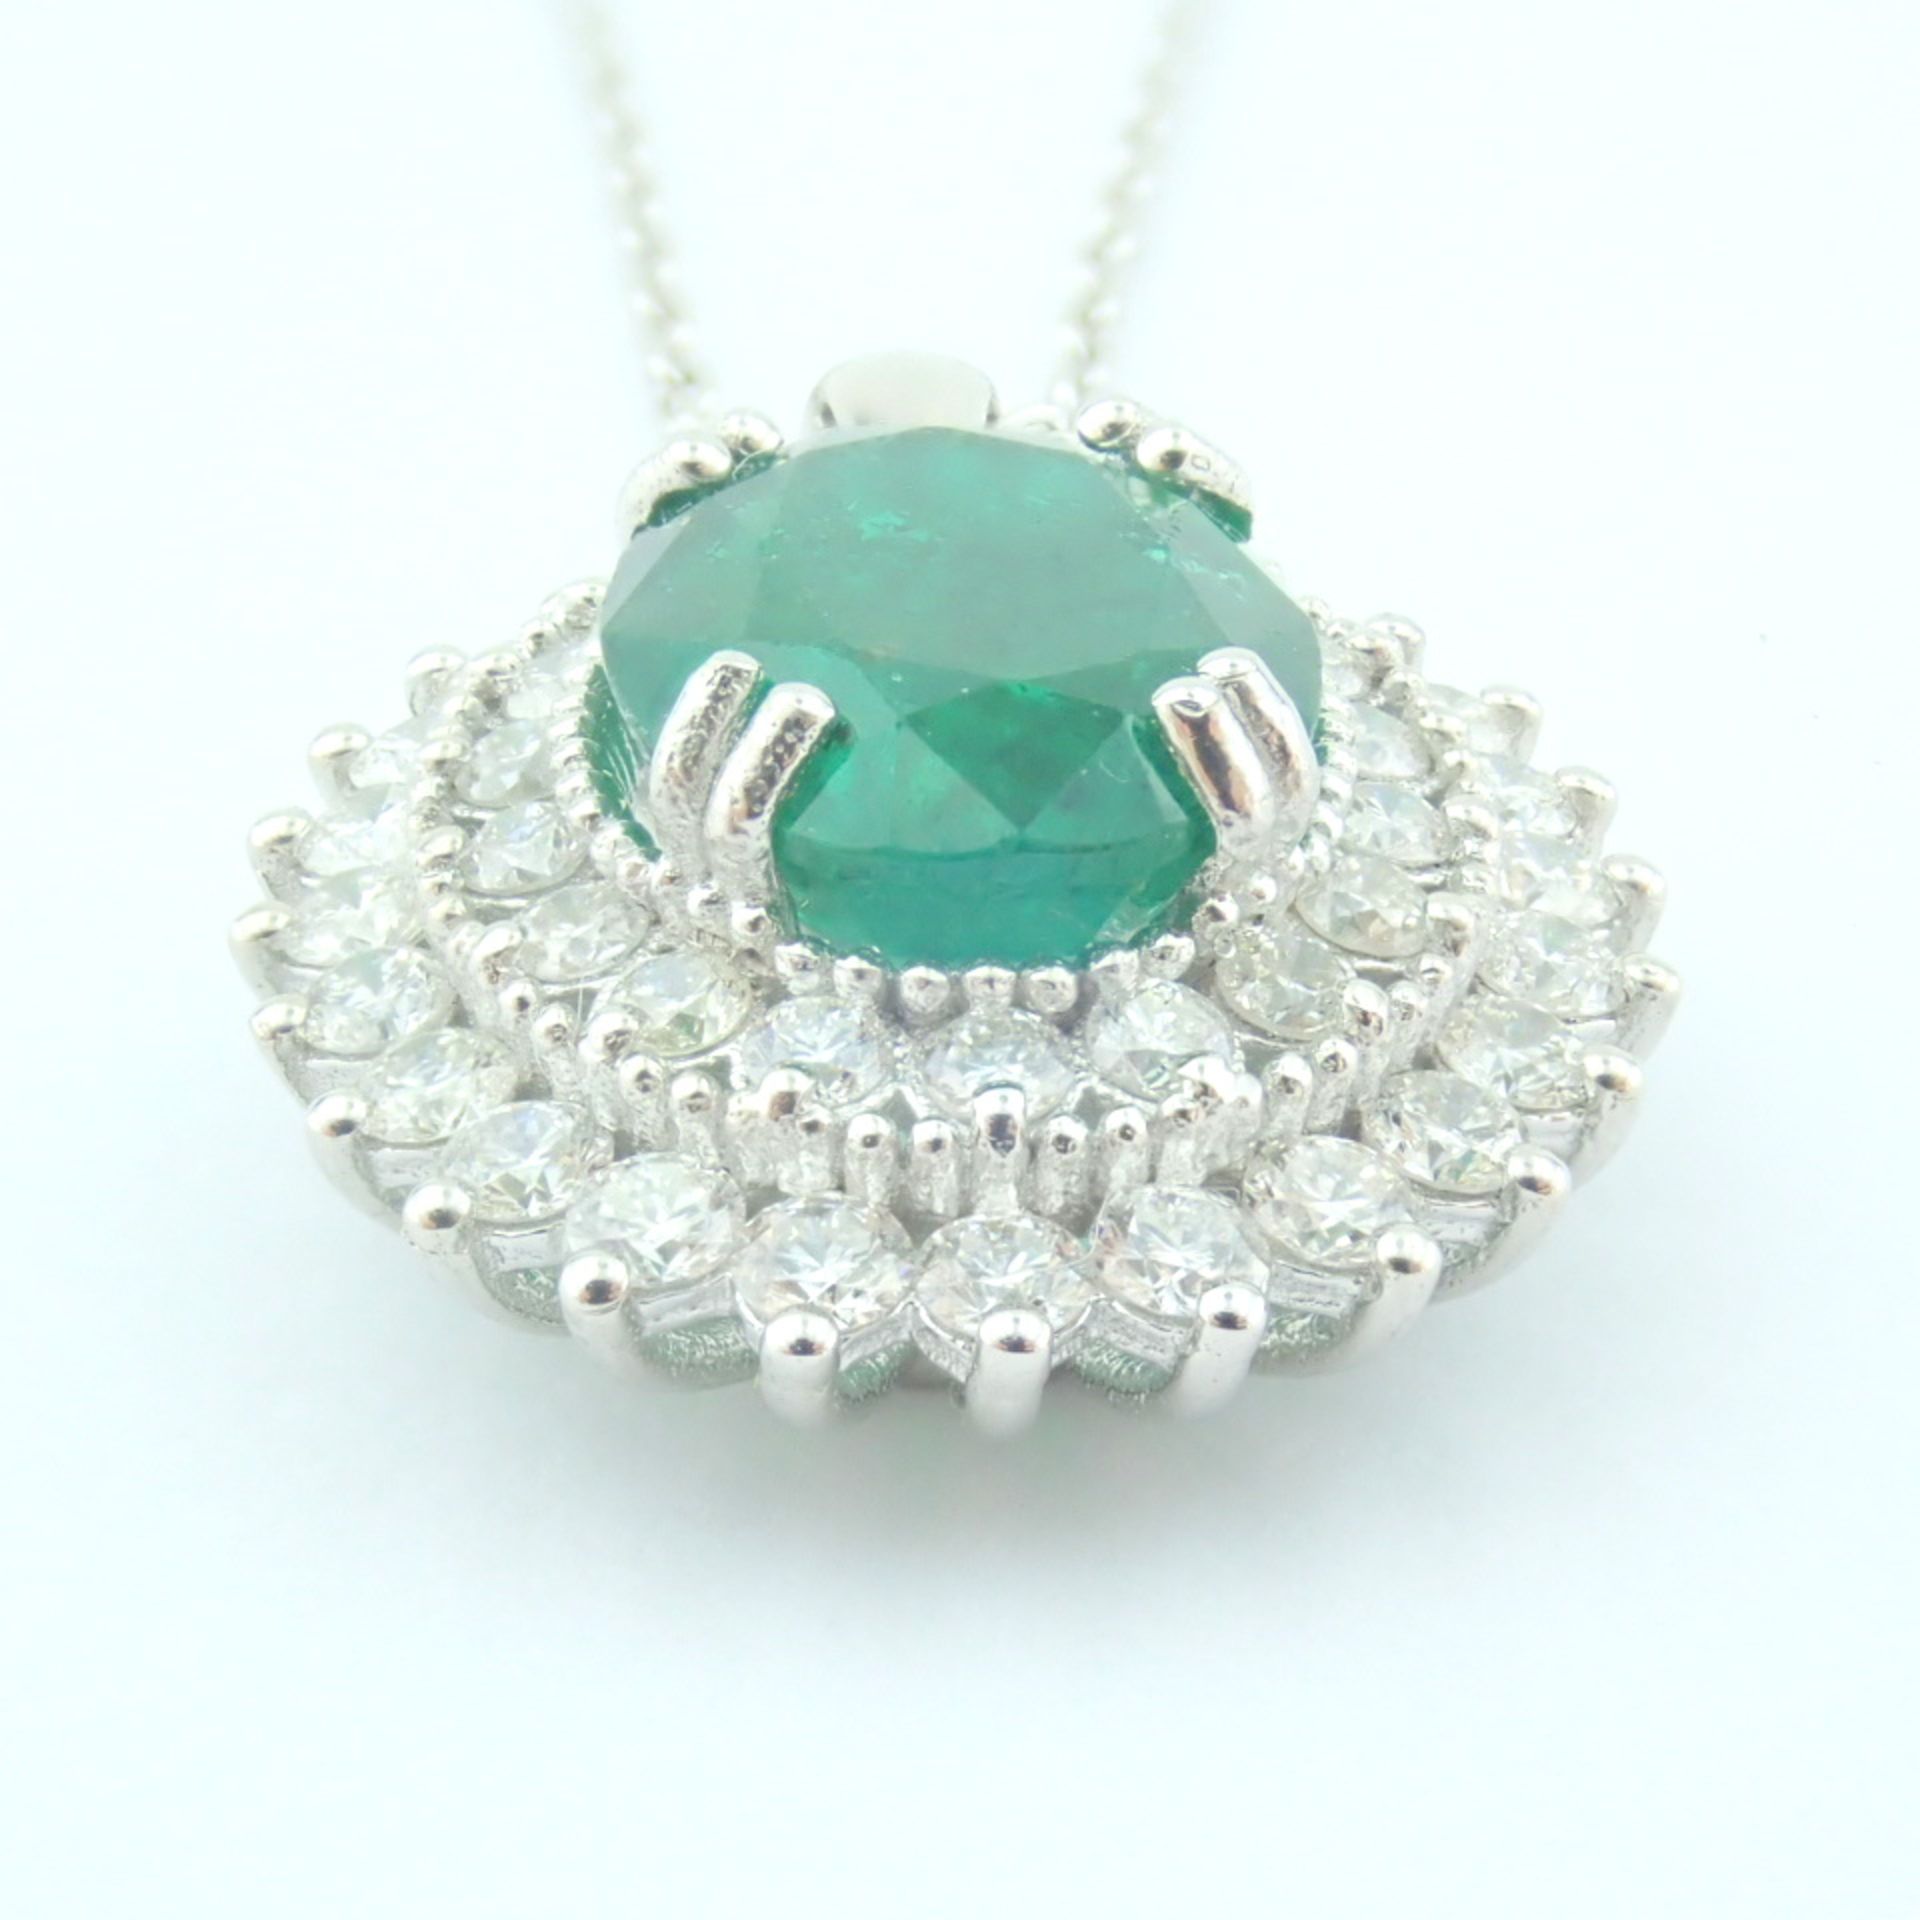 Certificated 14K White Gold Diamond & Emerald Necklace - Image 4 of 11